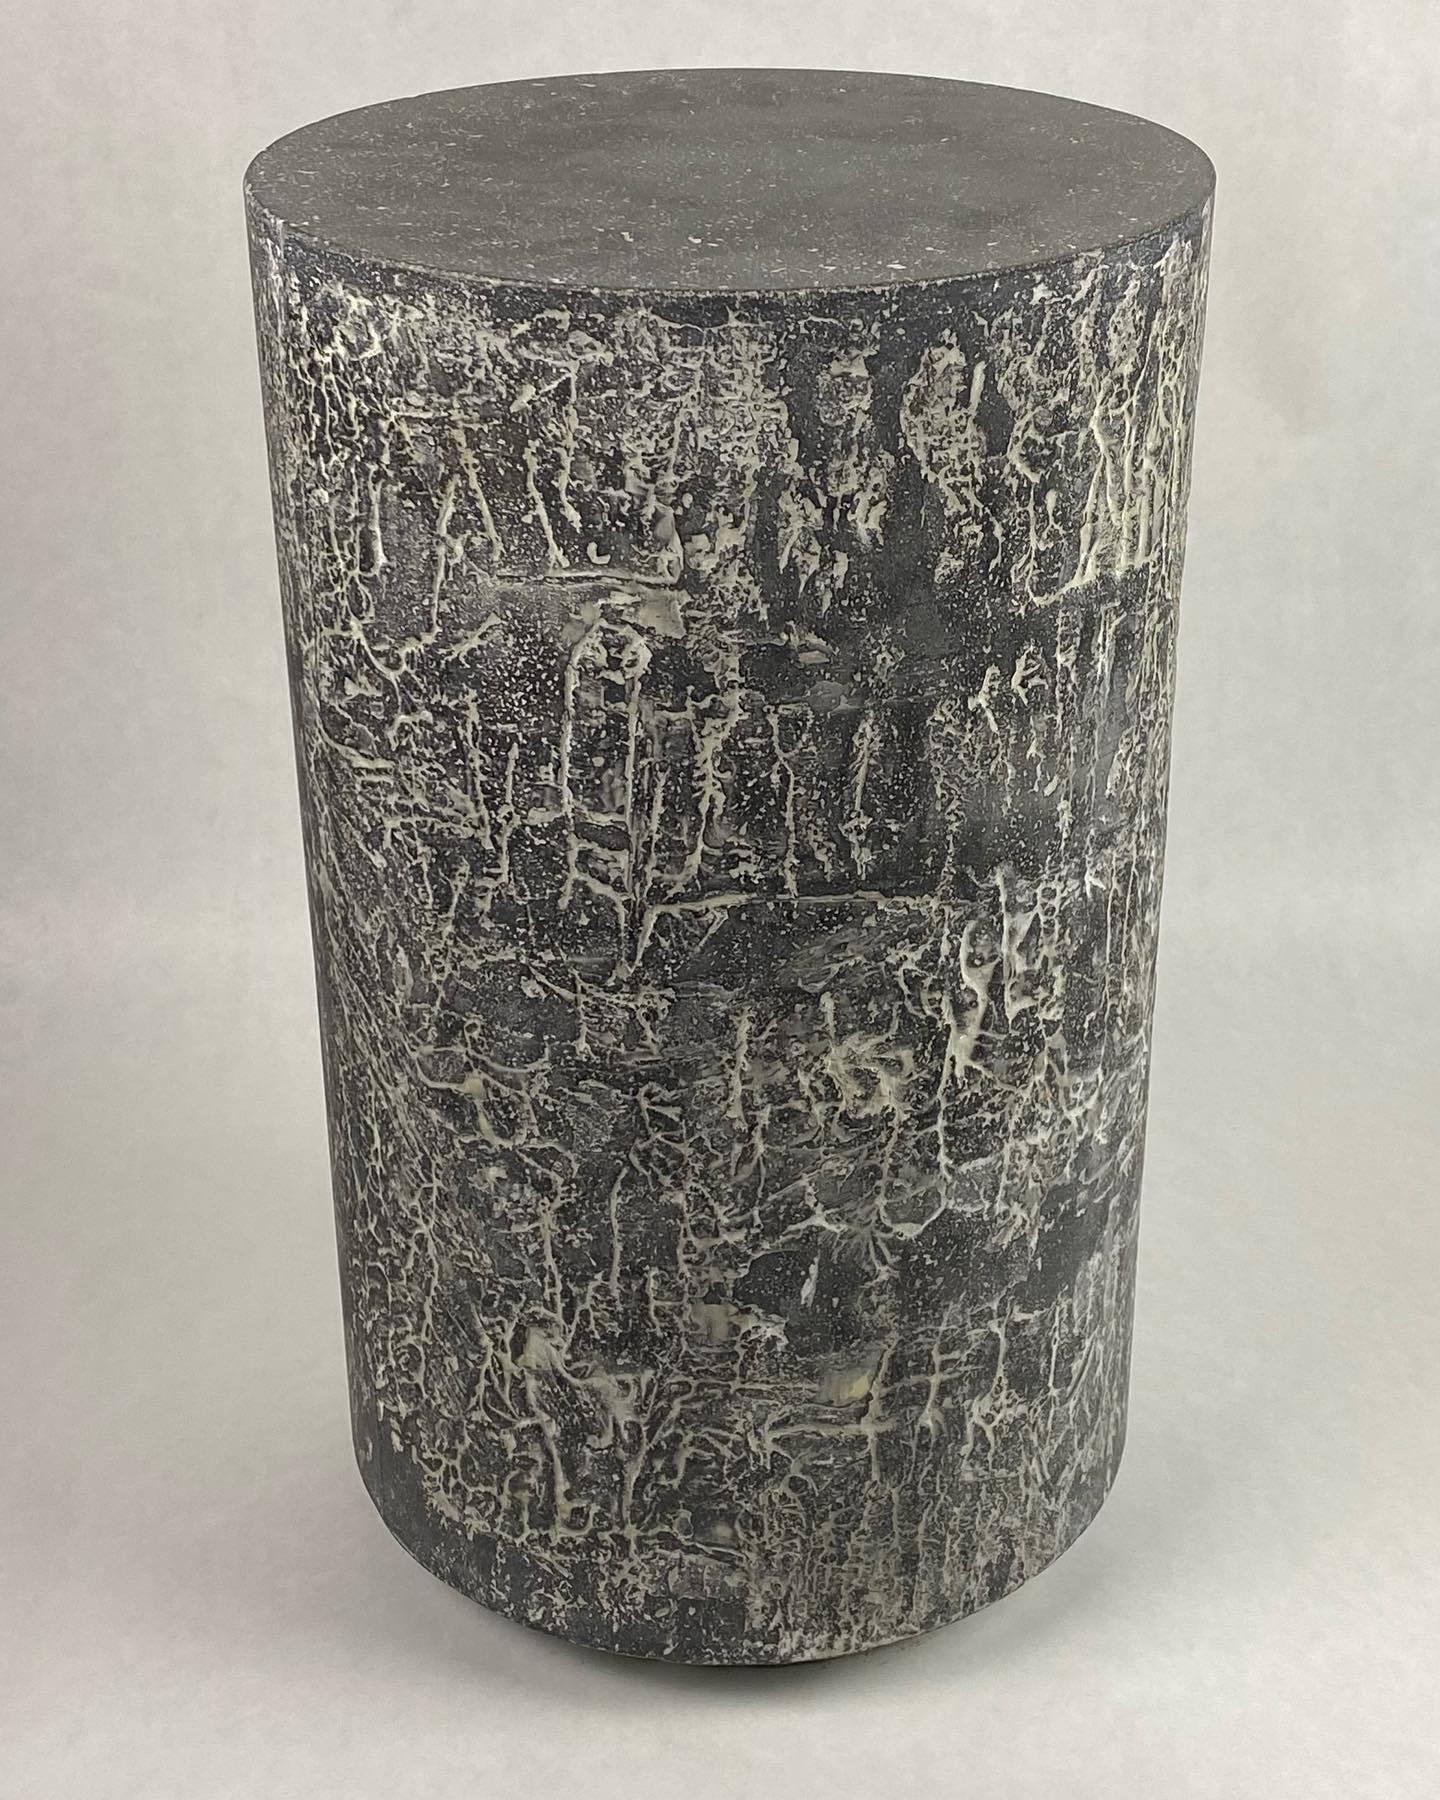 One of a kind, artistic concrete side or end table with textured black and white sides. Abstract line patterning on sides evoke an ancient script. Handpacked concrete made with Glass Fiber Reinforced Concrete techniques and recycled glass. Weighs